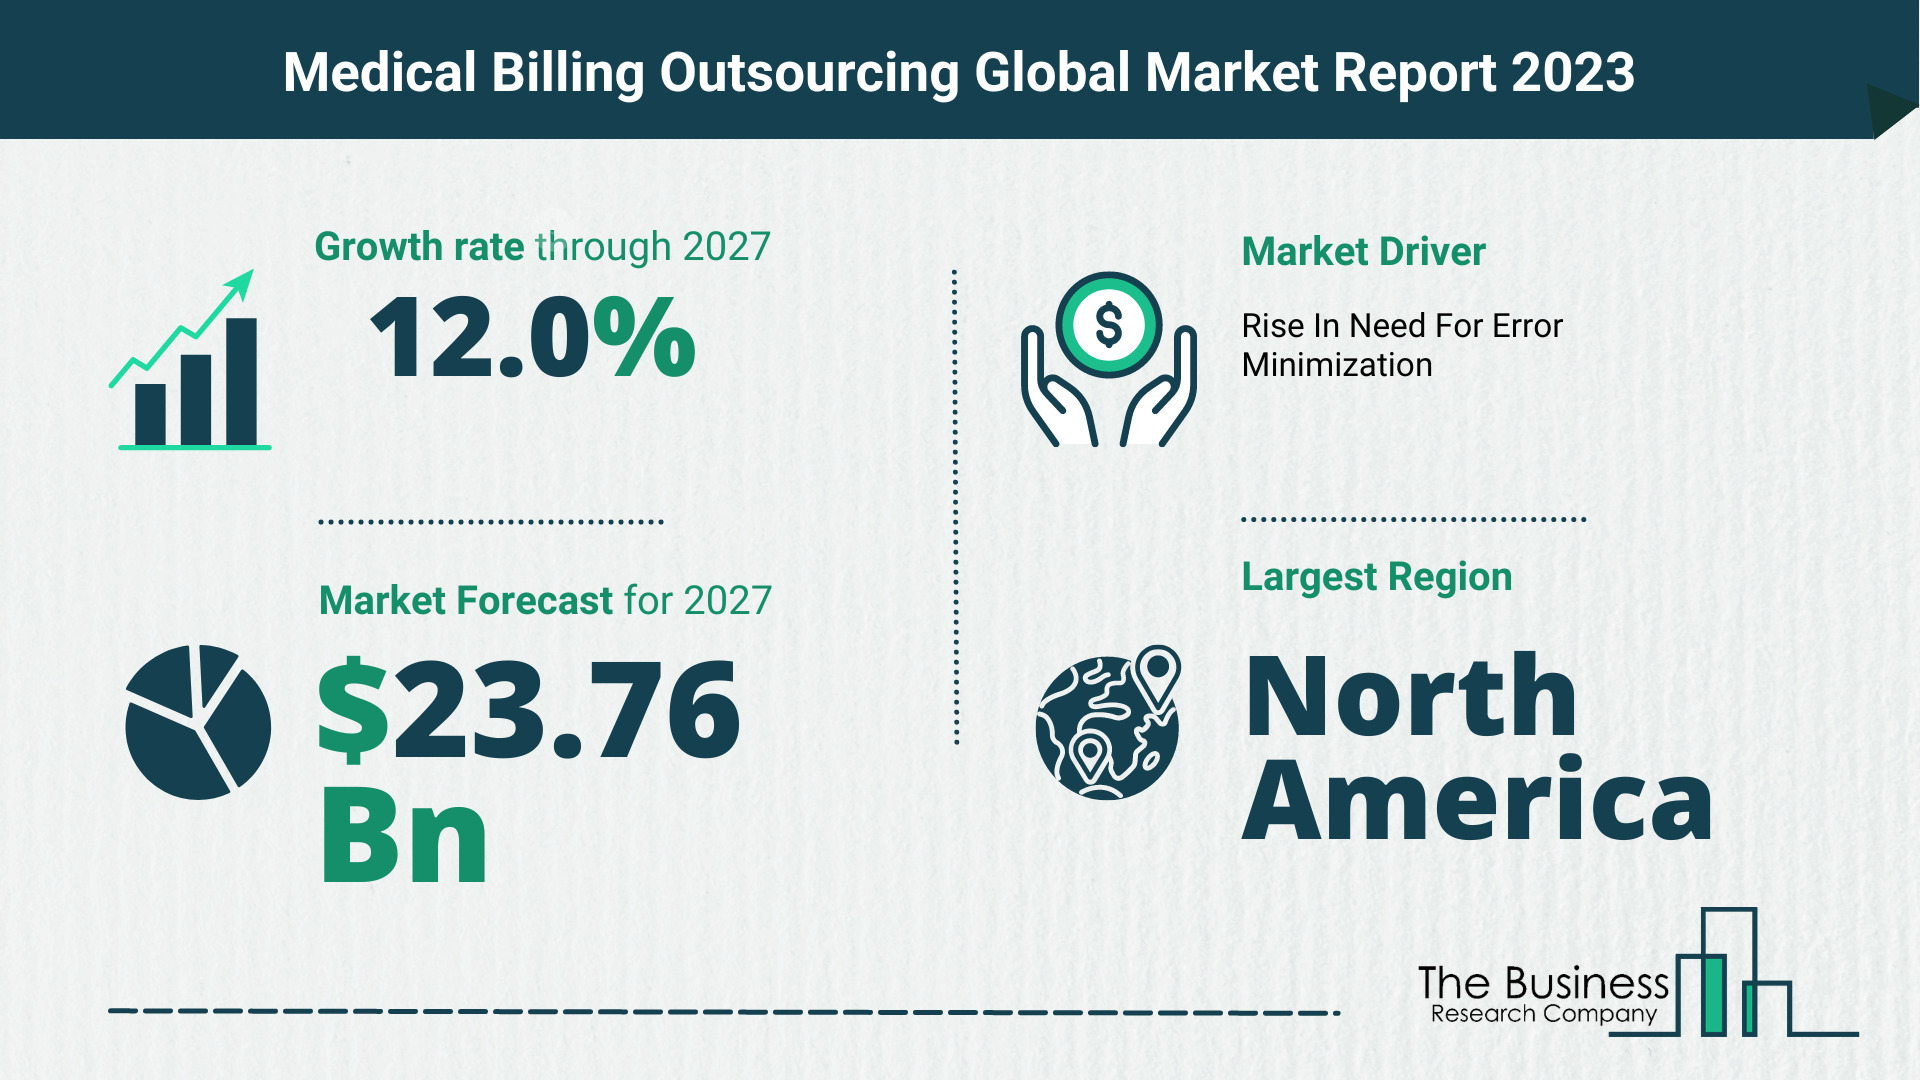 Global Medical Billing Outsourcing Market Opportunities And Strategies 2023